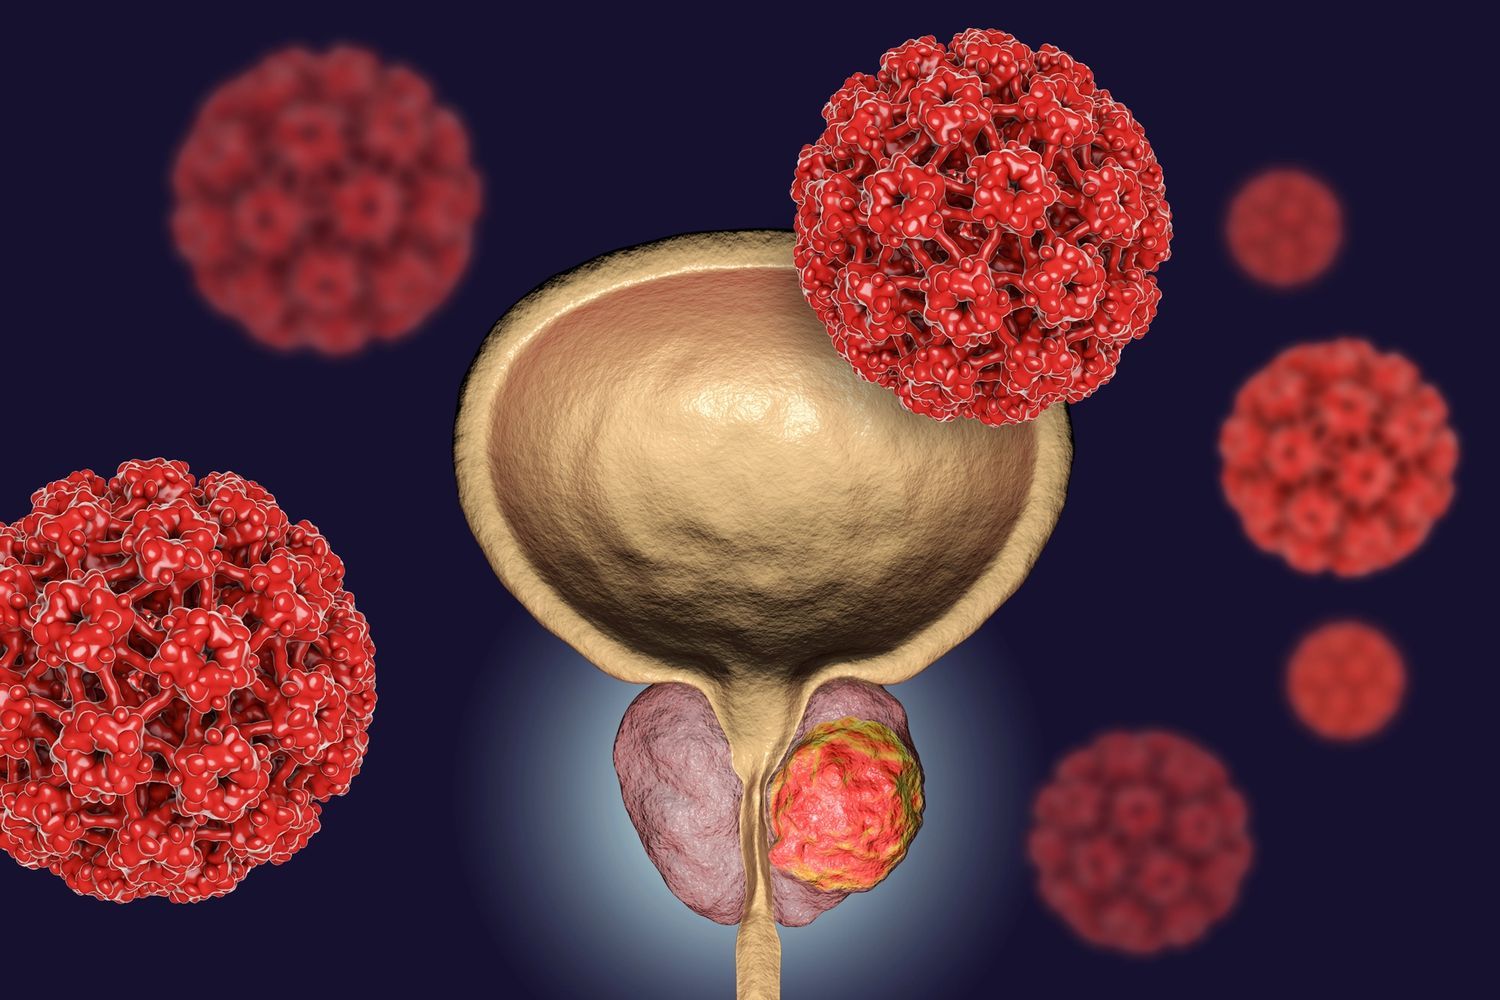 The immunotherapy pembrolizumab continues to be explored in other settings in prostate cancer.